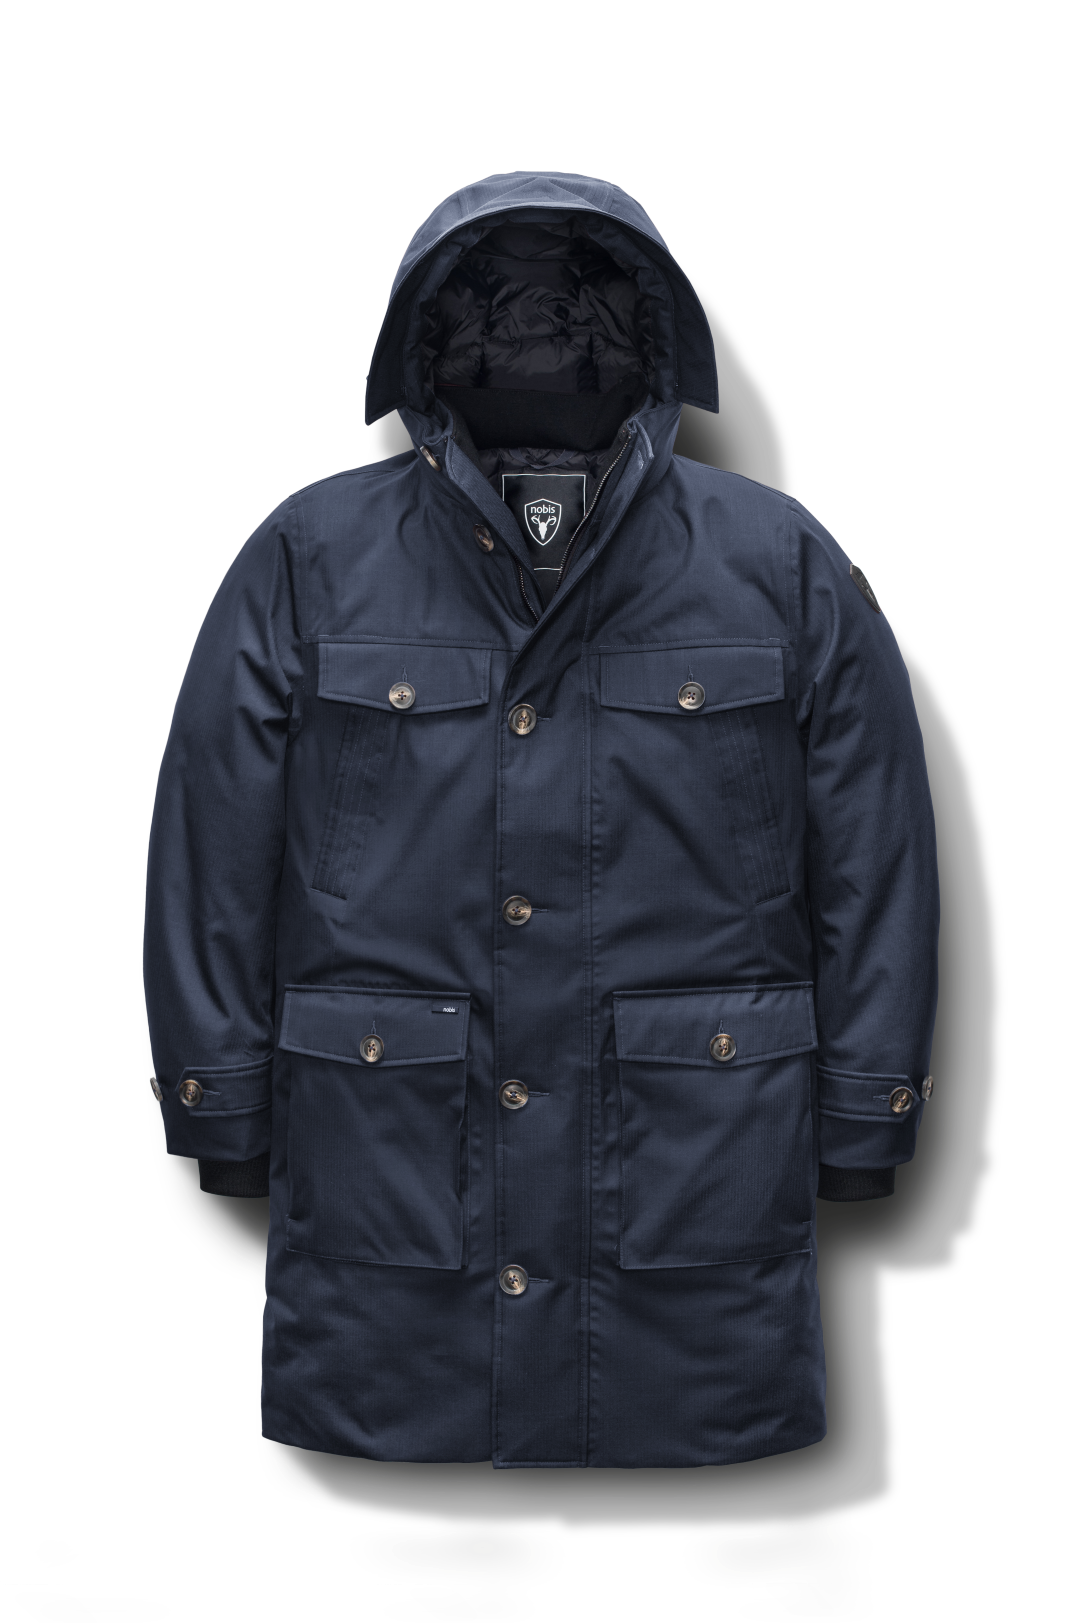 Citizen Men's Tailored Parka in knee length, Canadian duck down insulation, non-removable hood, and two-way zipper, in Navy